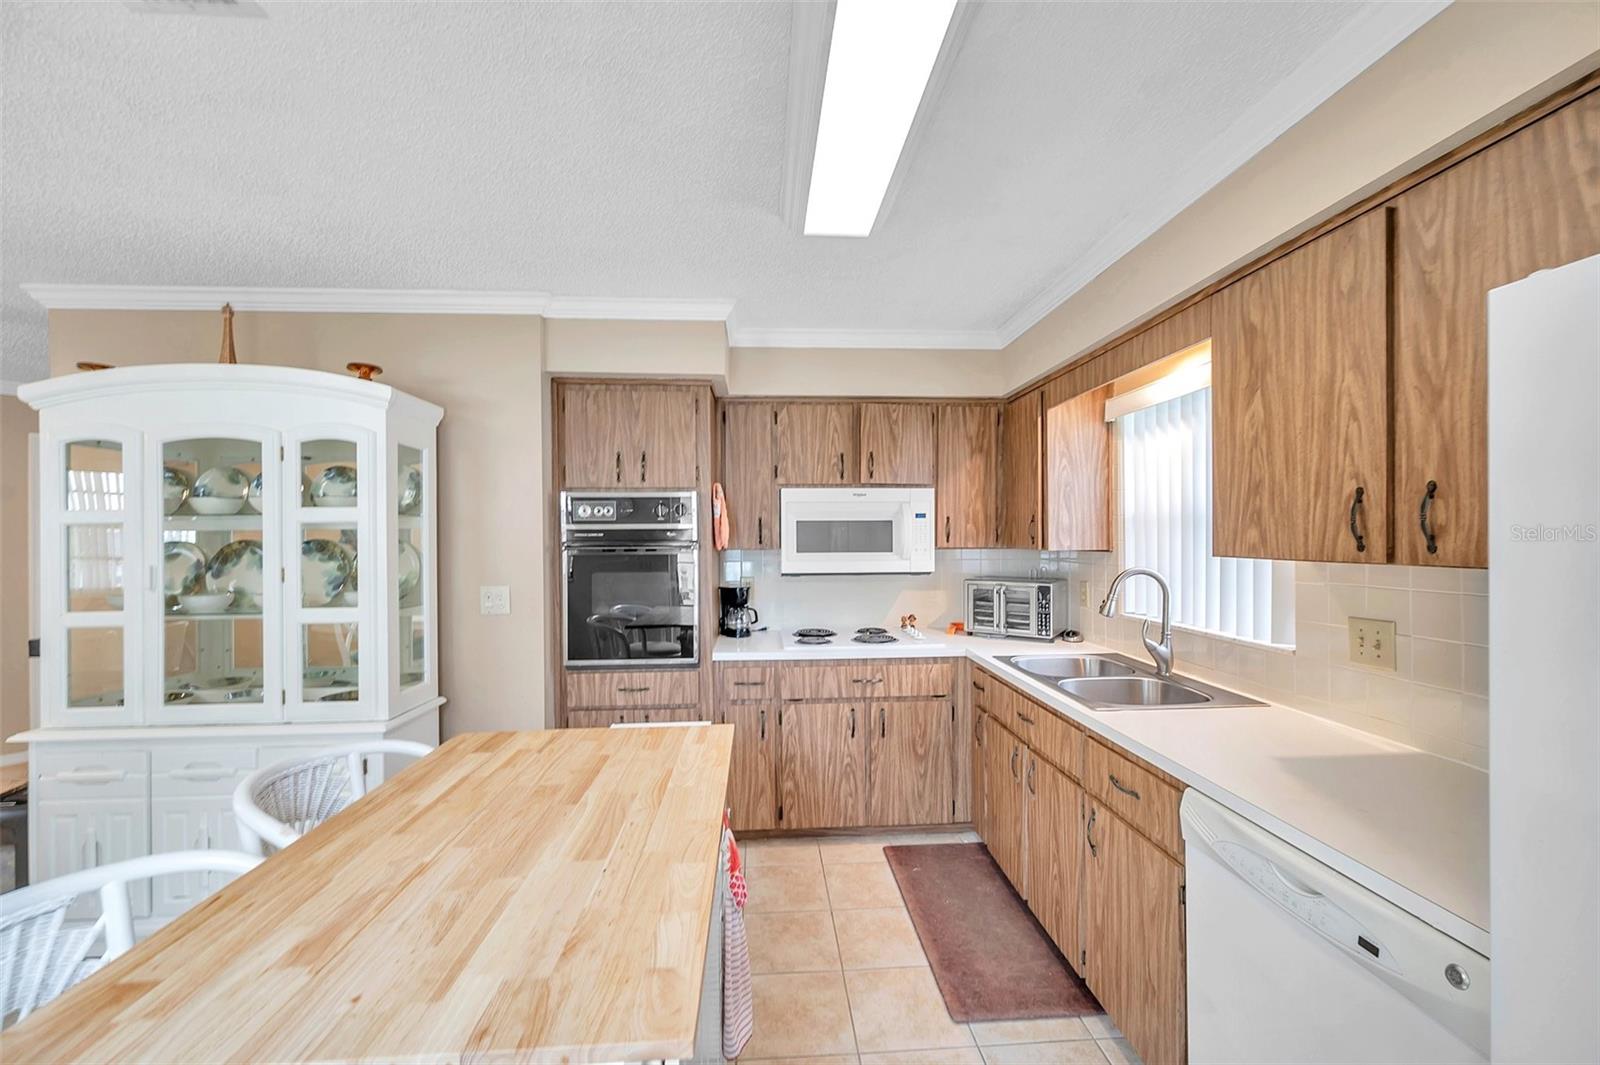 Kitchen view. Double stainless-steel sink with garbage disposal. It also included the refrigerator, built in microwave over the stovetop, built in wall oven, and dishwasher,